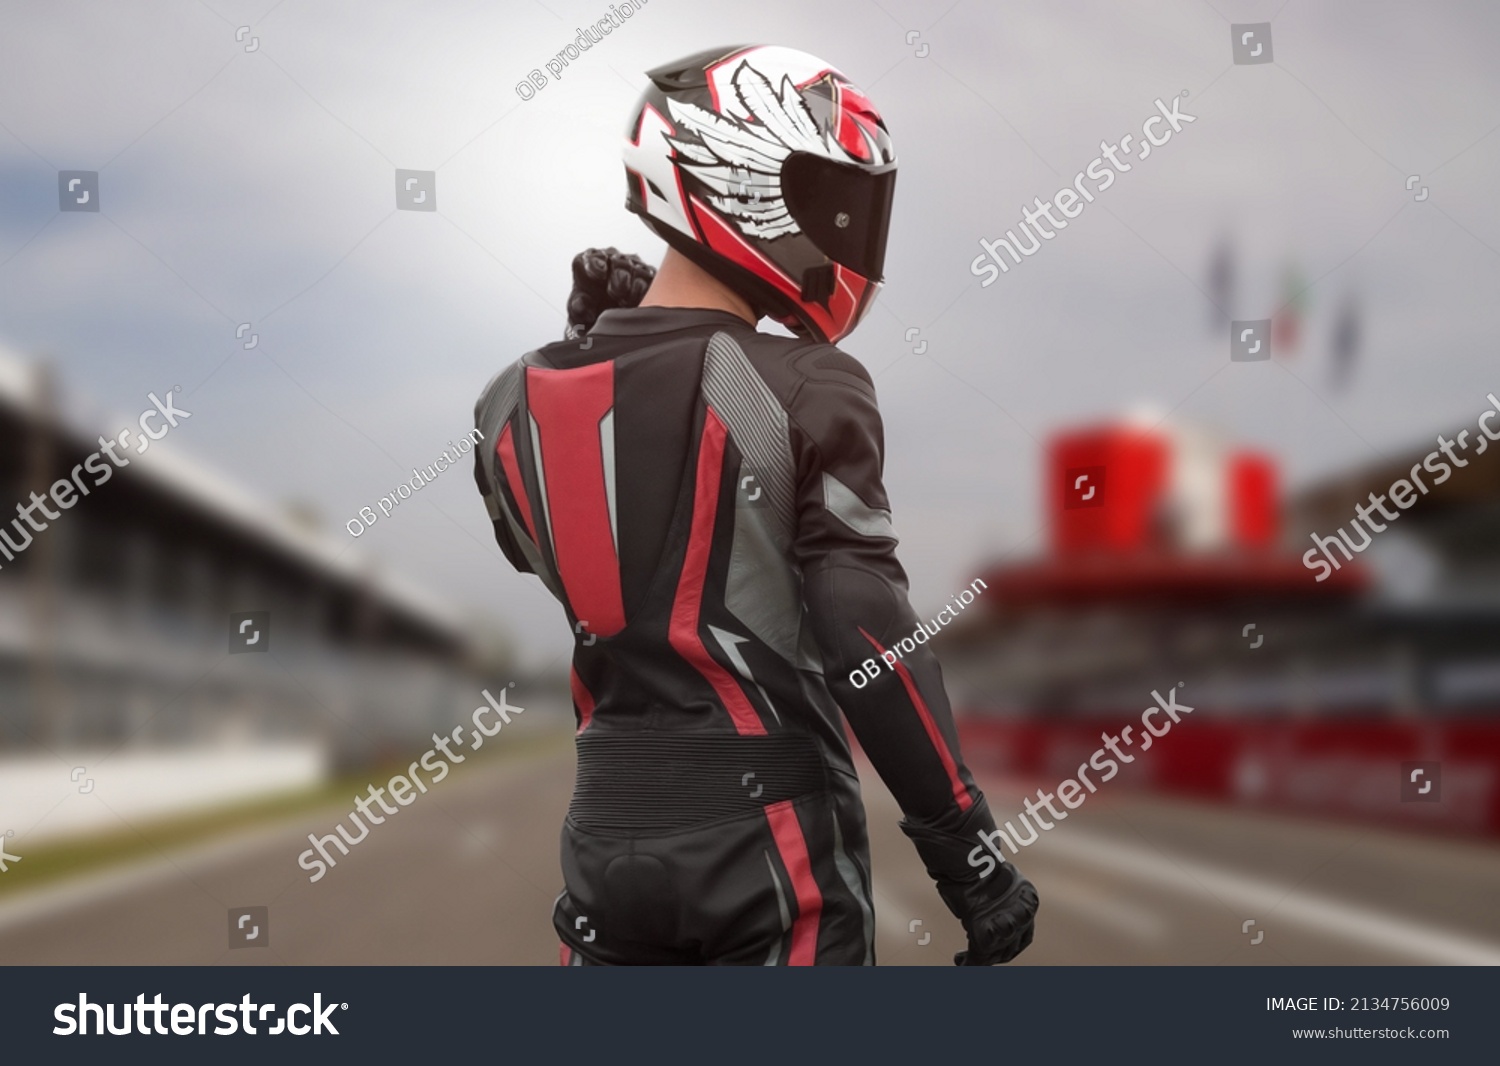 Motorcyclist in full gear and helmet on the race track. #2134756009